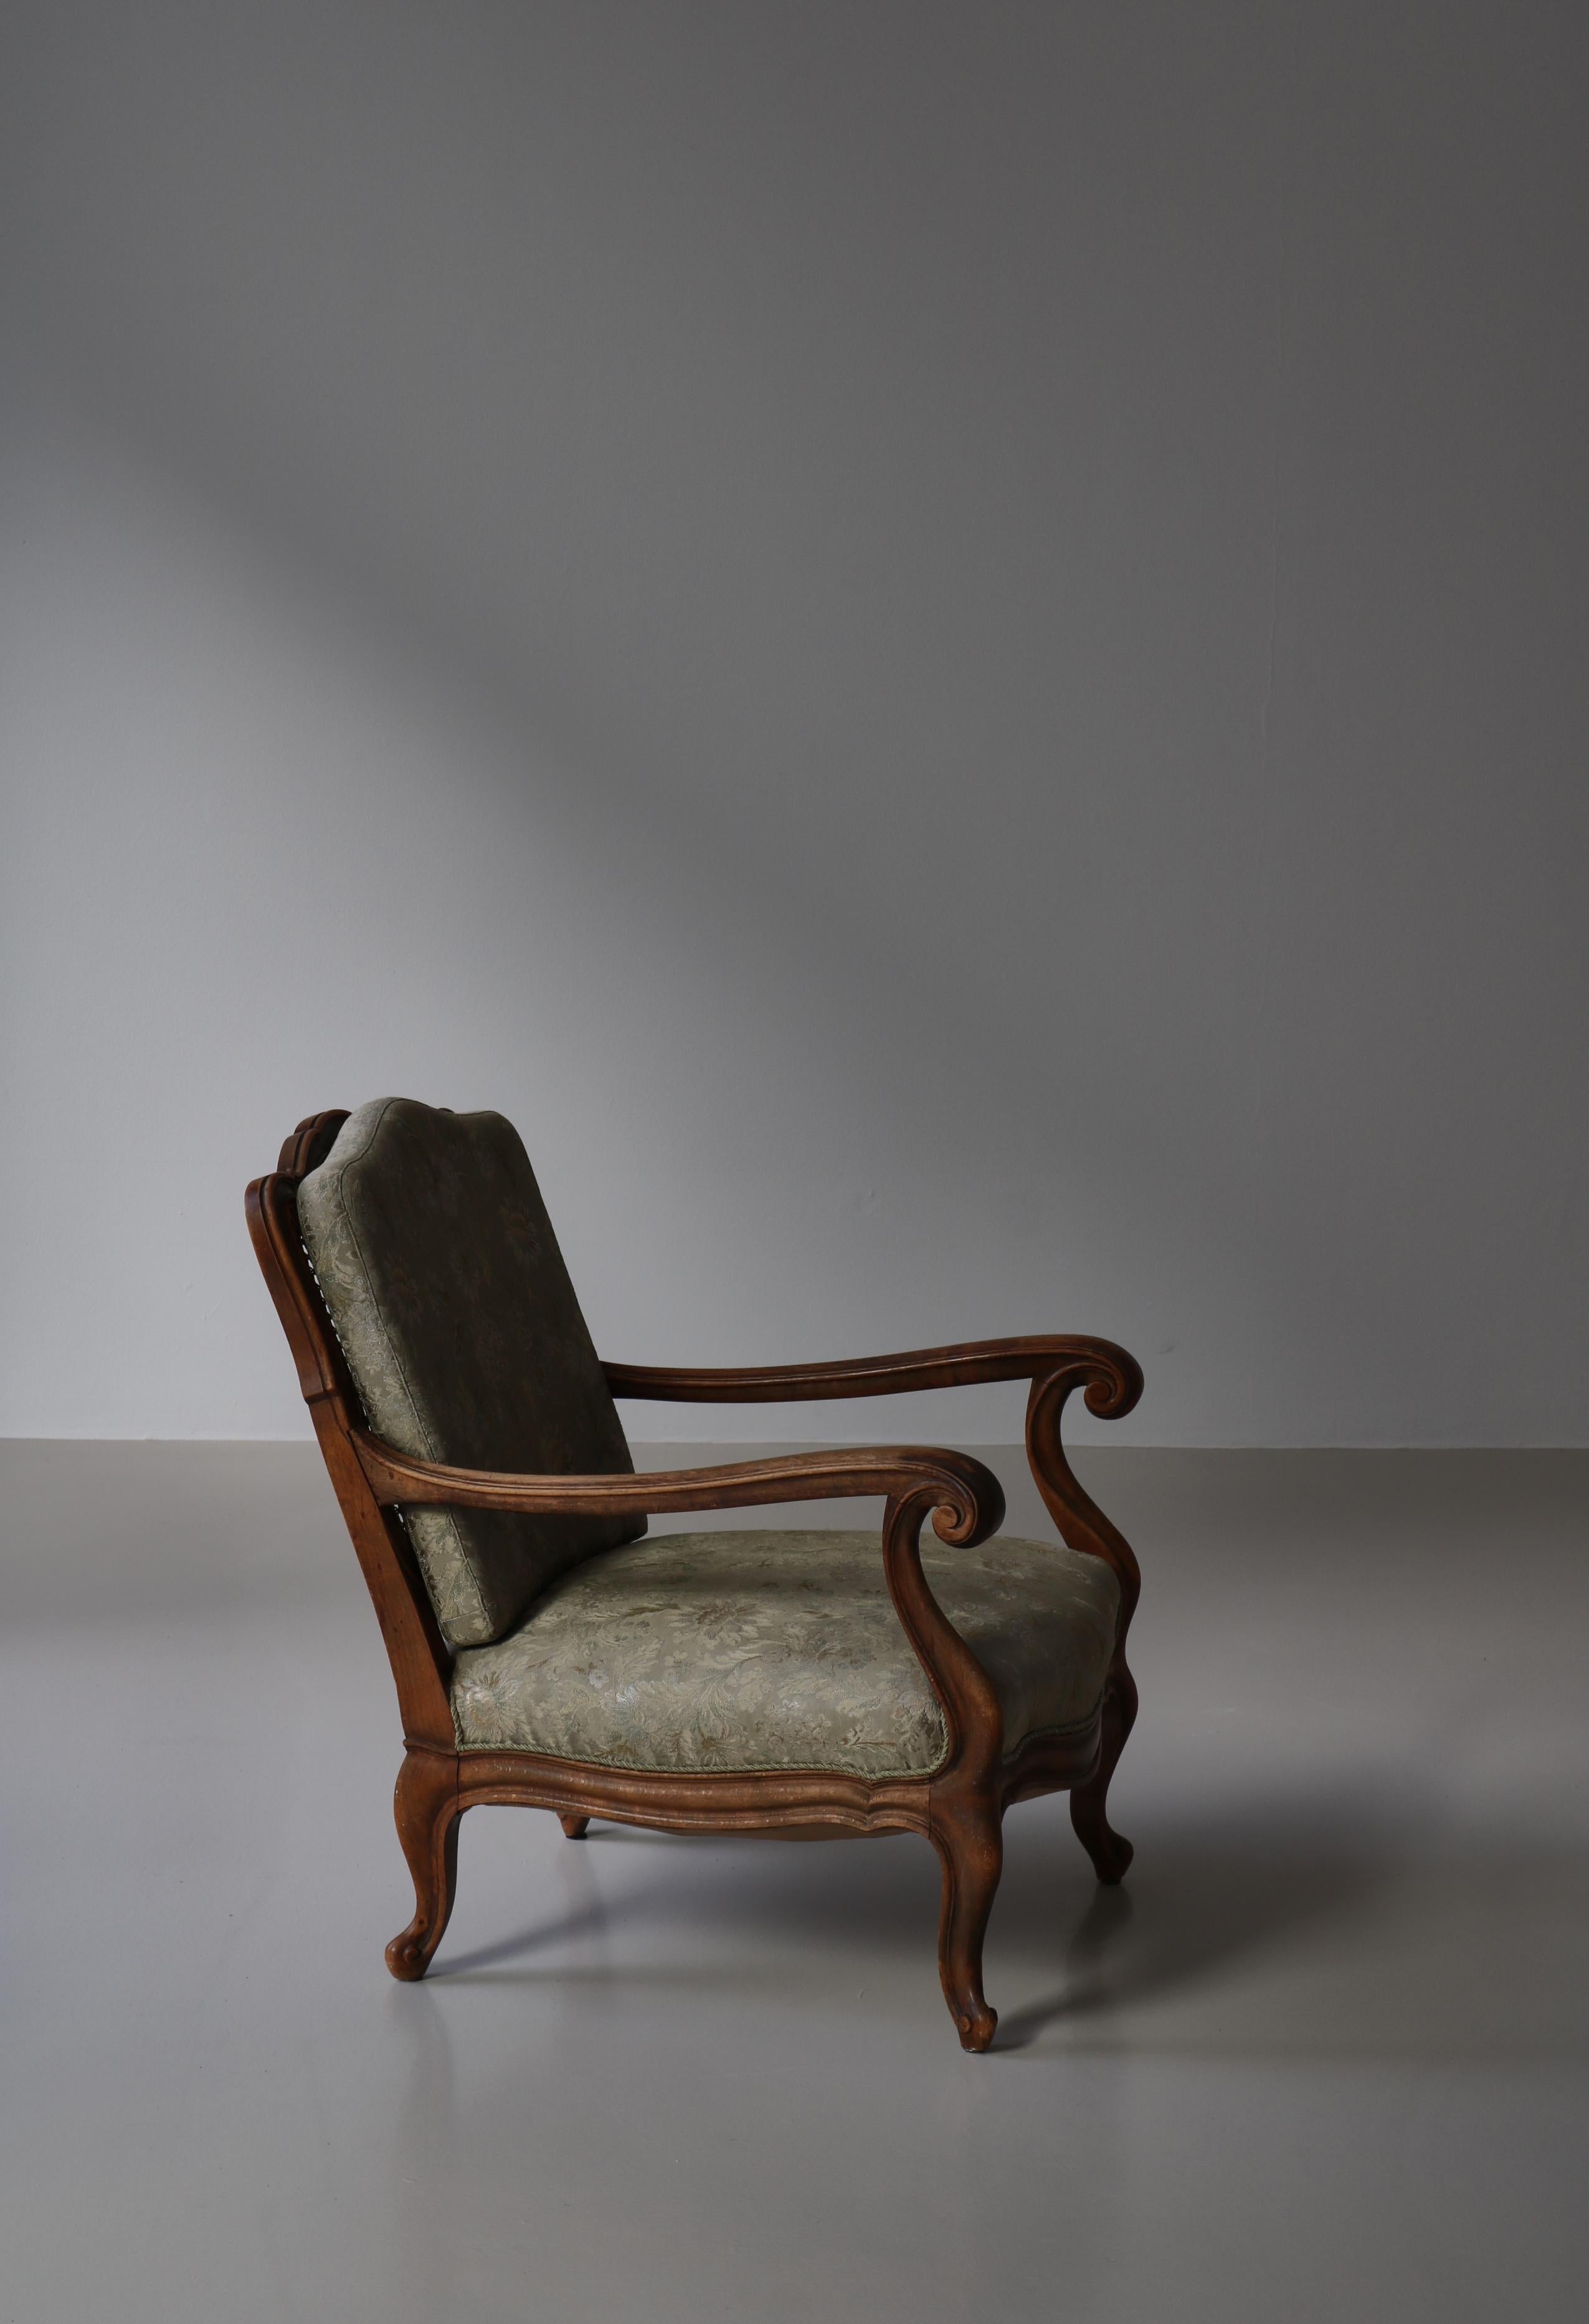 Bergére Chair Rococo Revival by Danish Cabinetmaker, Early 20th Century For Sale 14